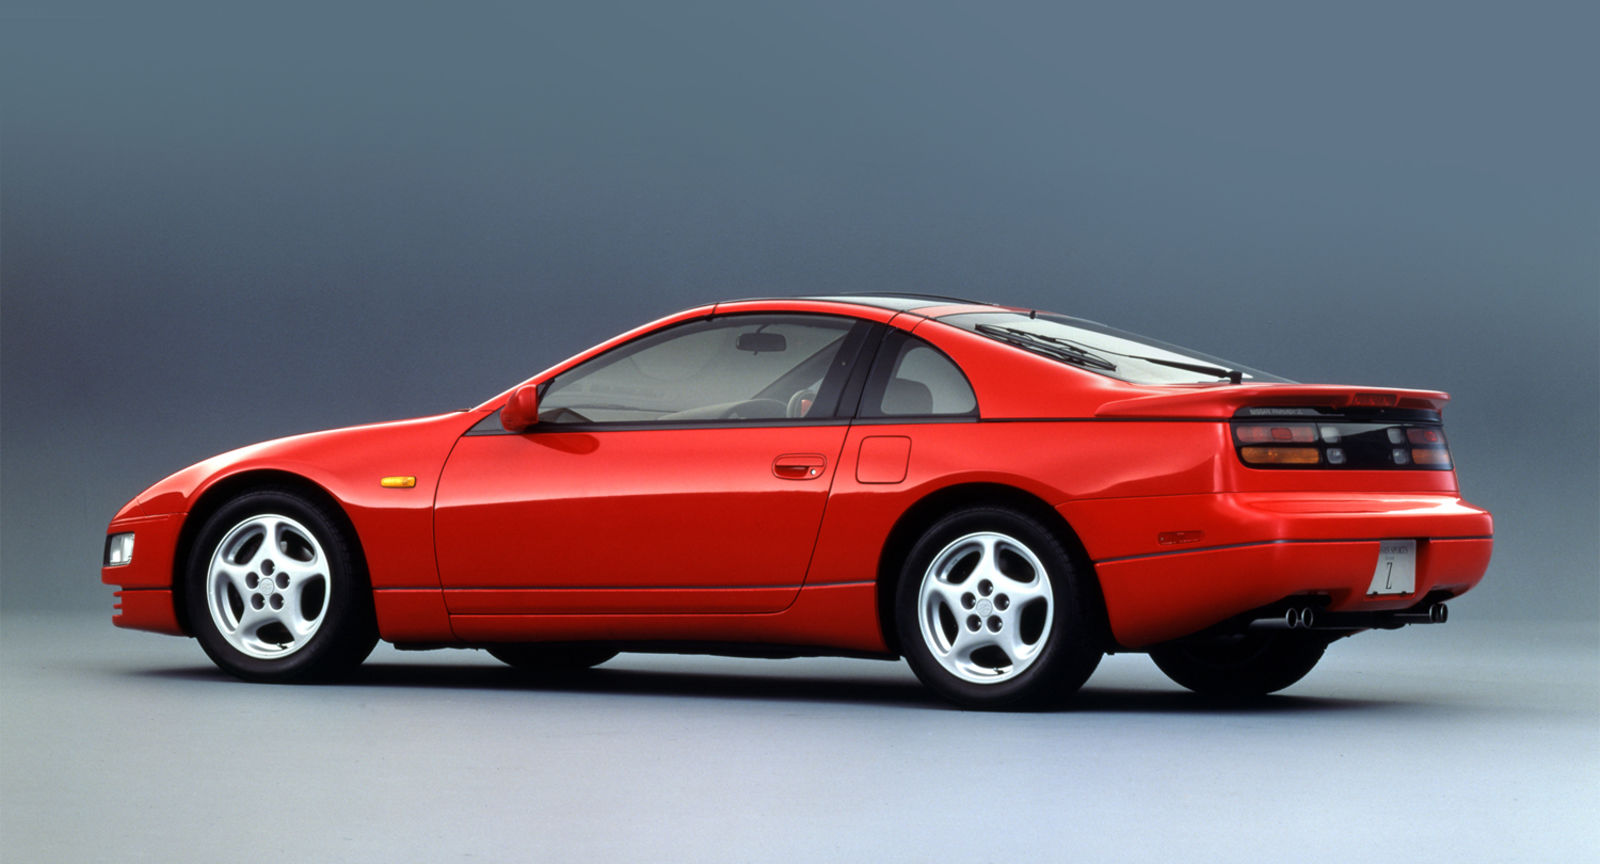 Illustration for article titled Nissan 300Zx was best Nissan Z